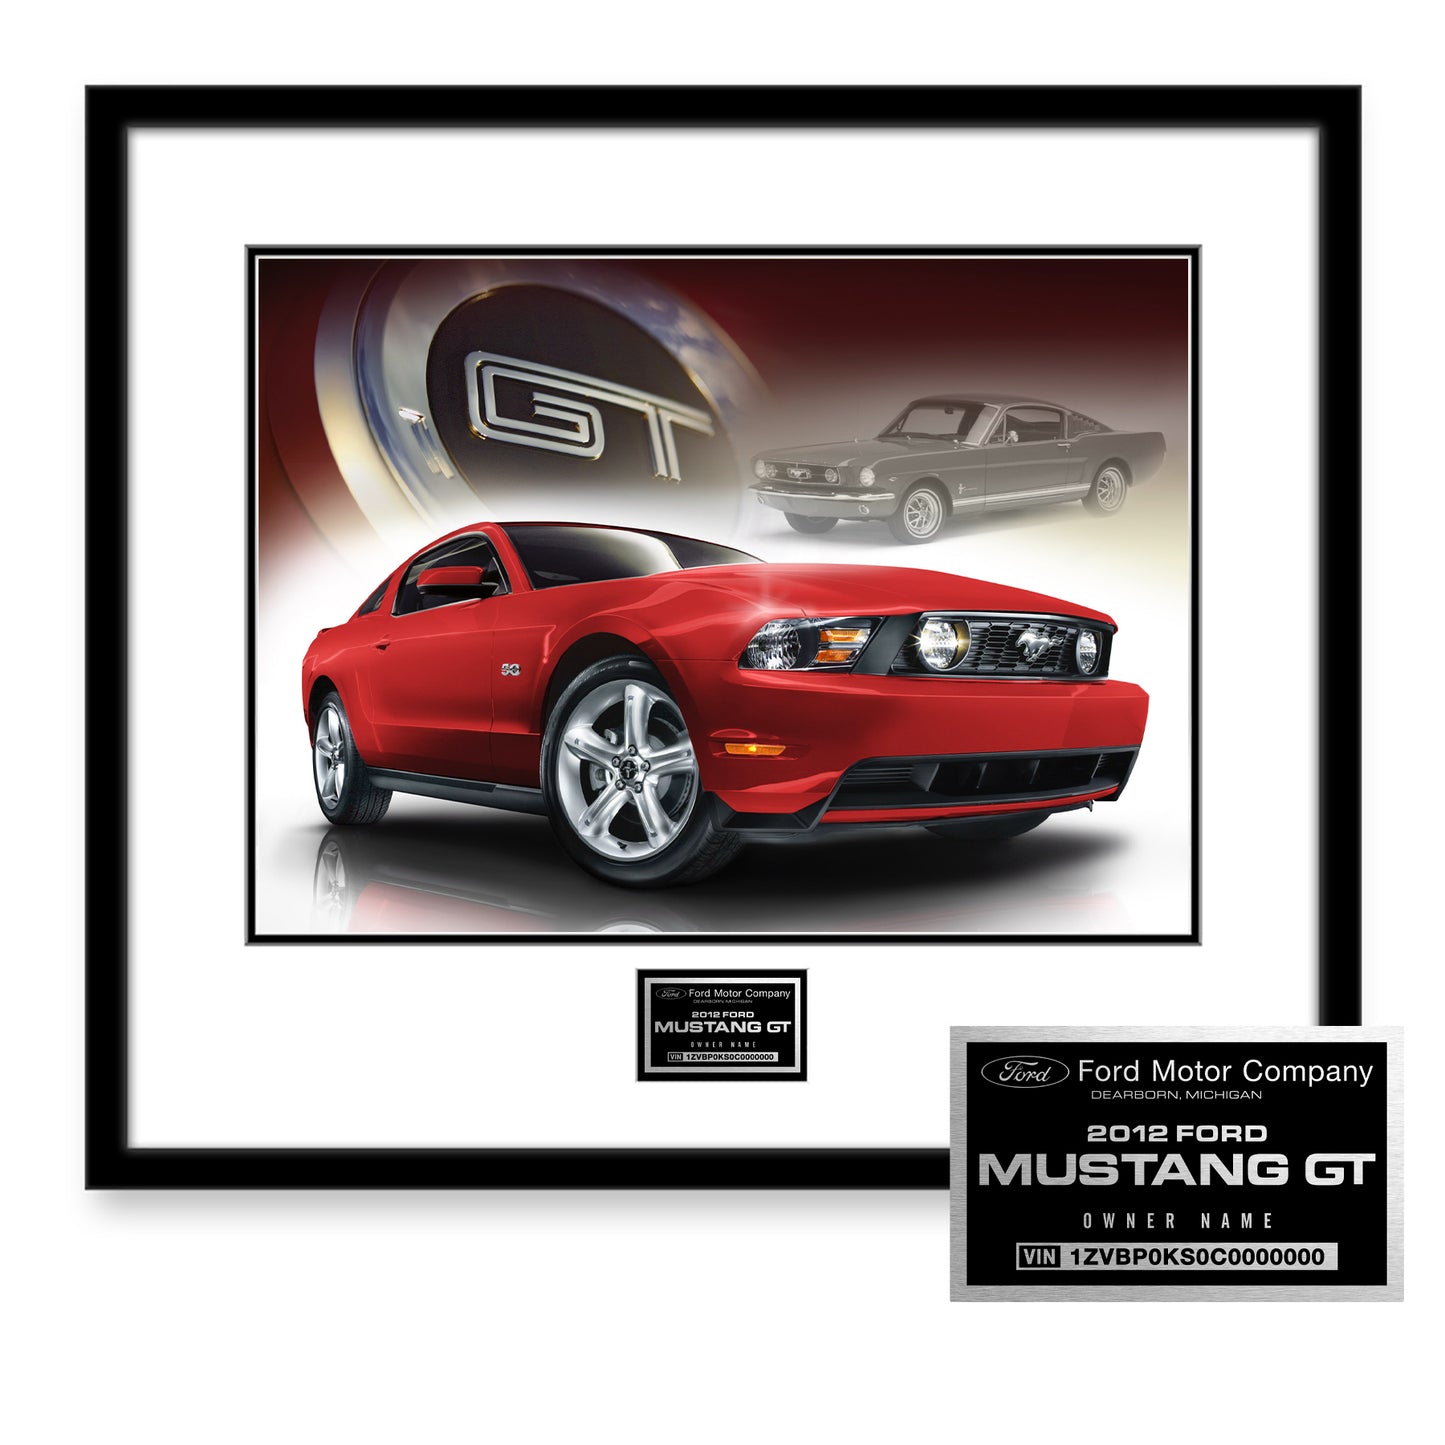 BUILD MY 2012 MUSTANG GT OWNERS EDITION